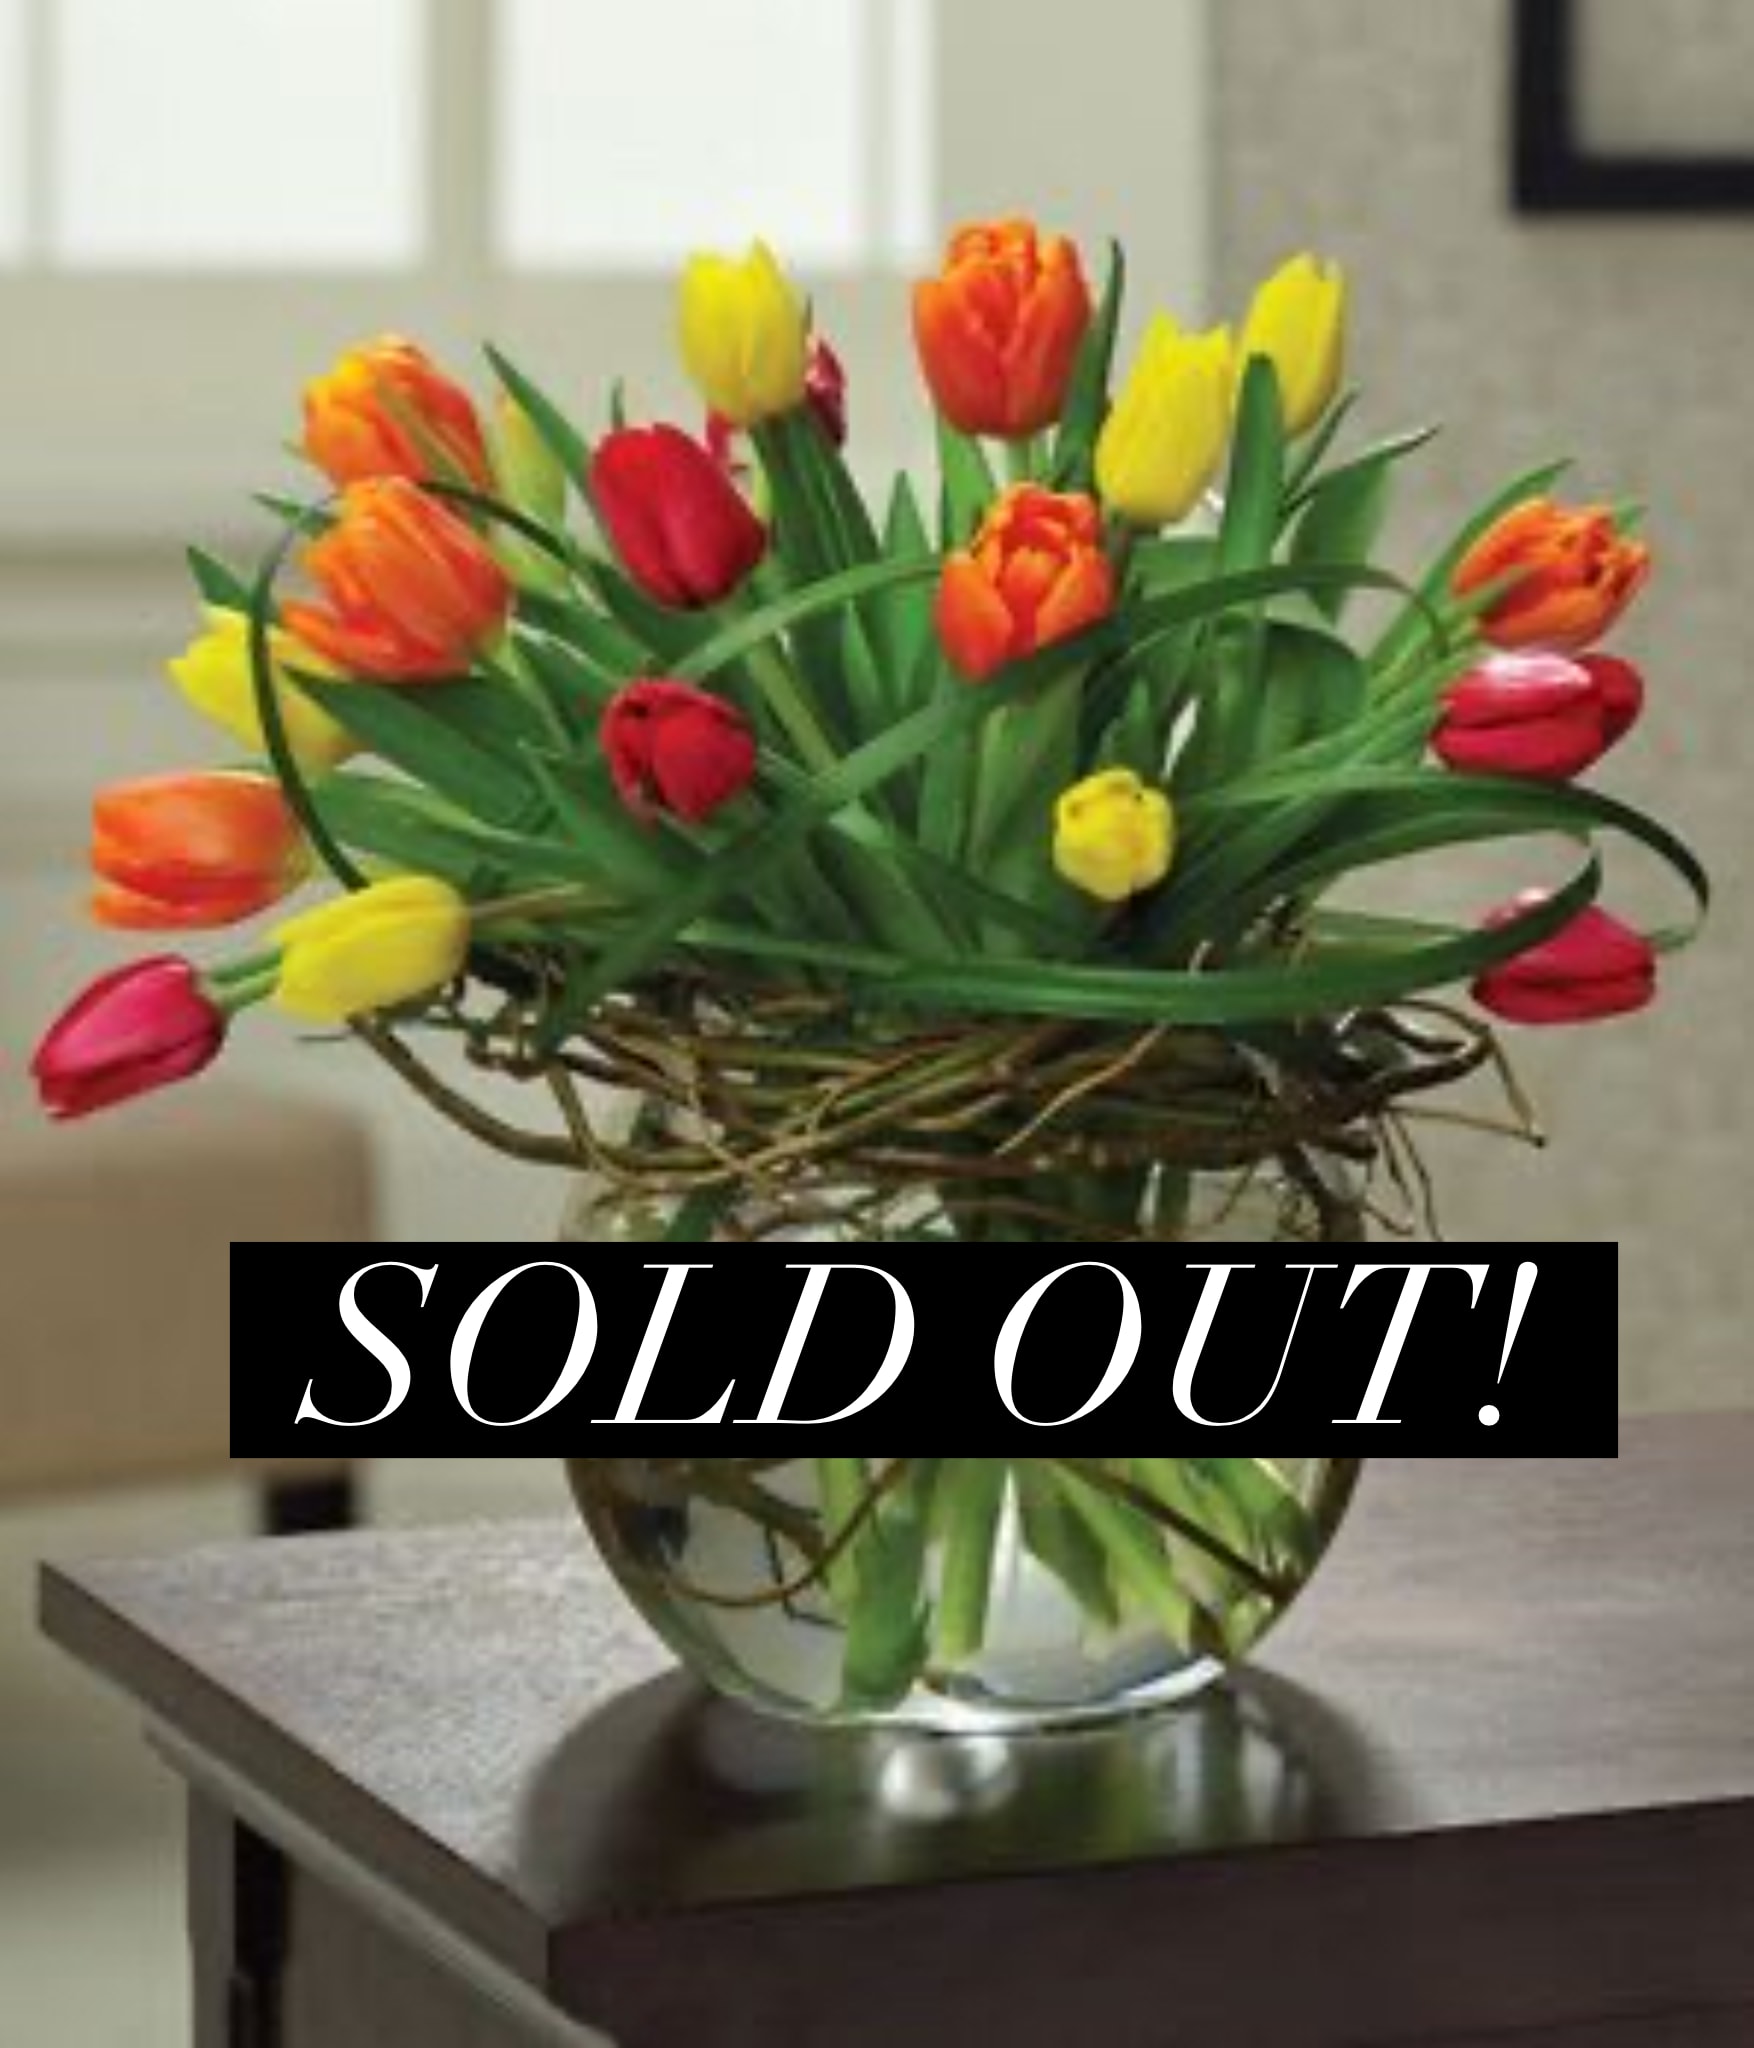 Splendid Tulips - Mixture of Beautiful Tulips in Round Glass Vase with Curly Willow